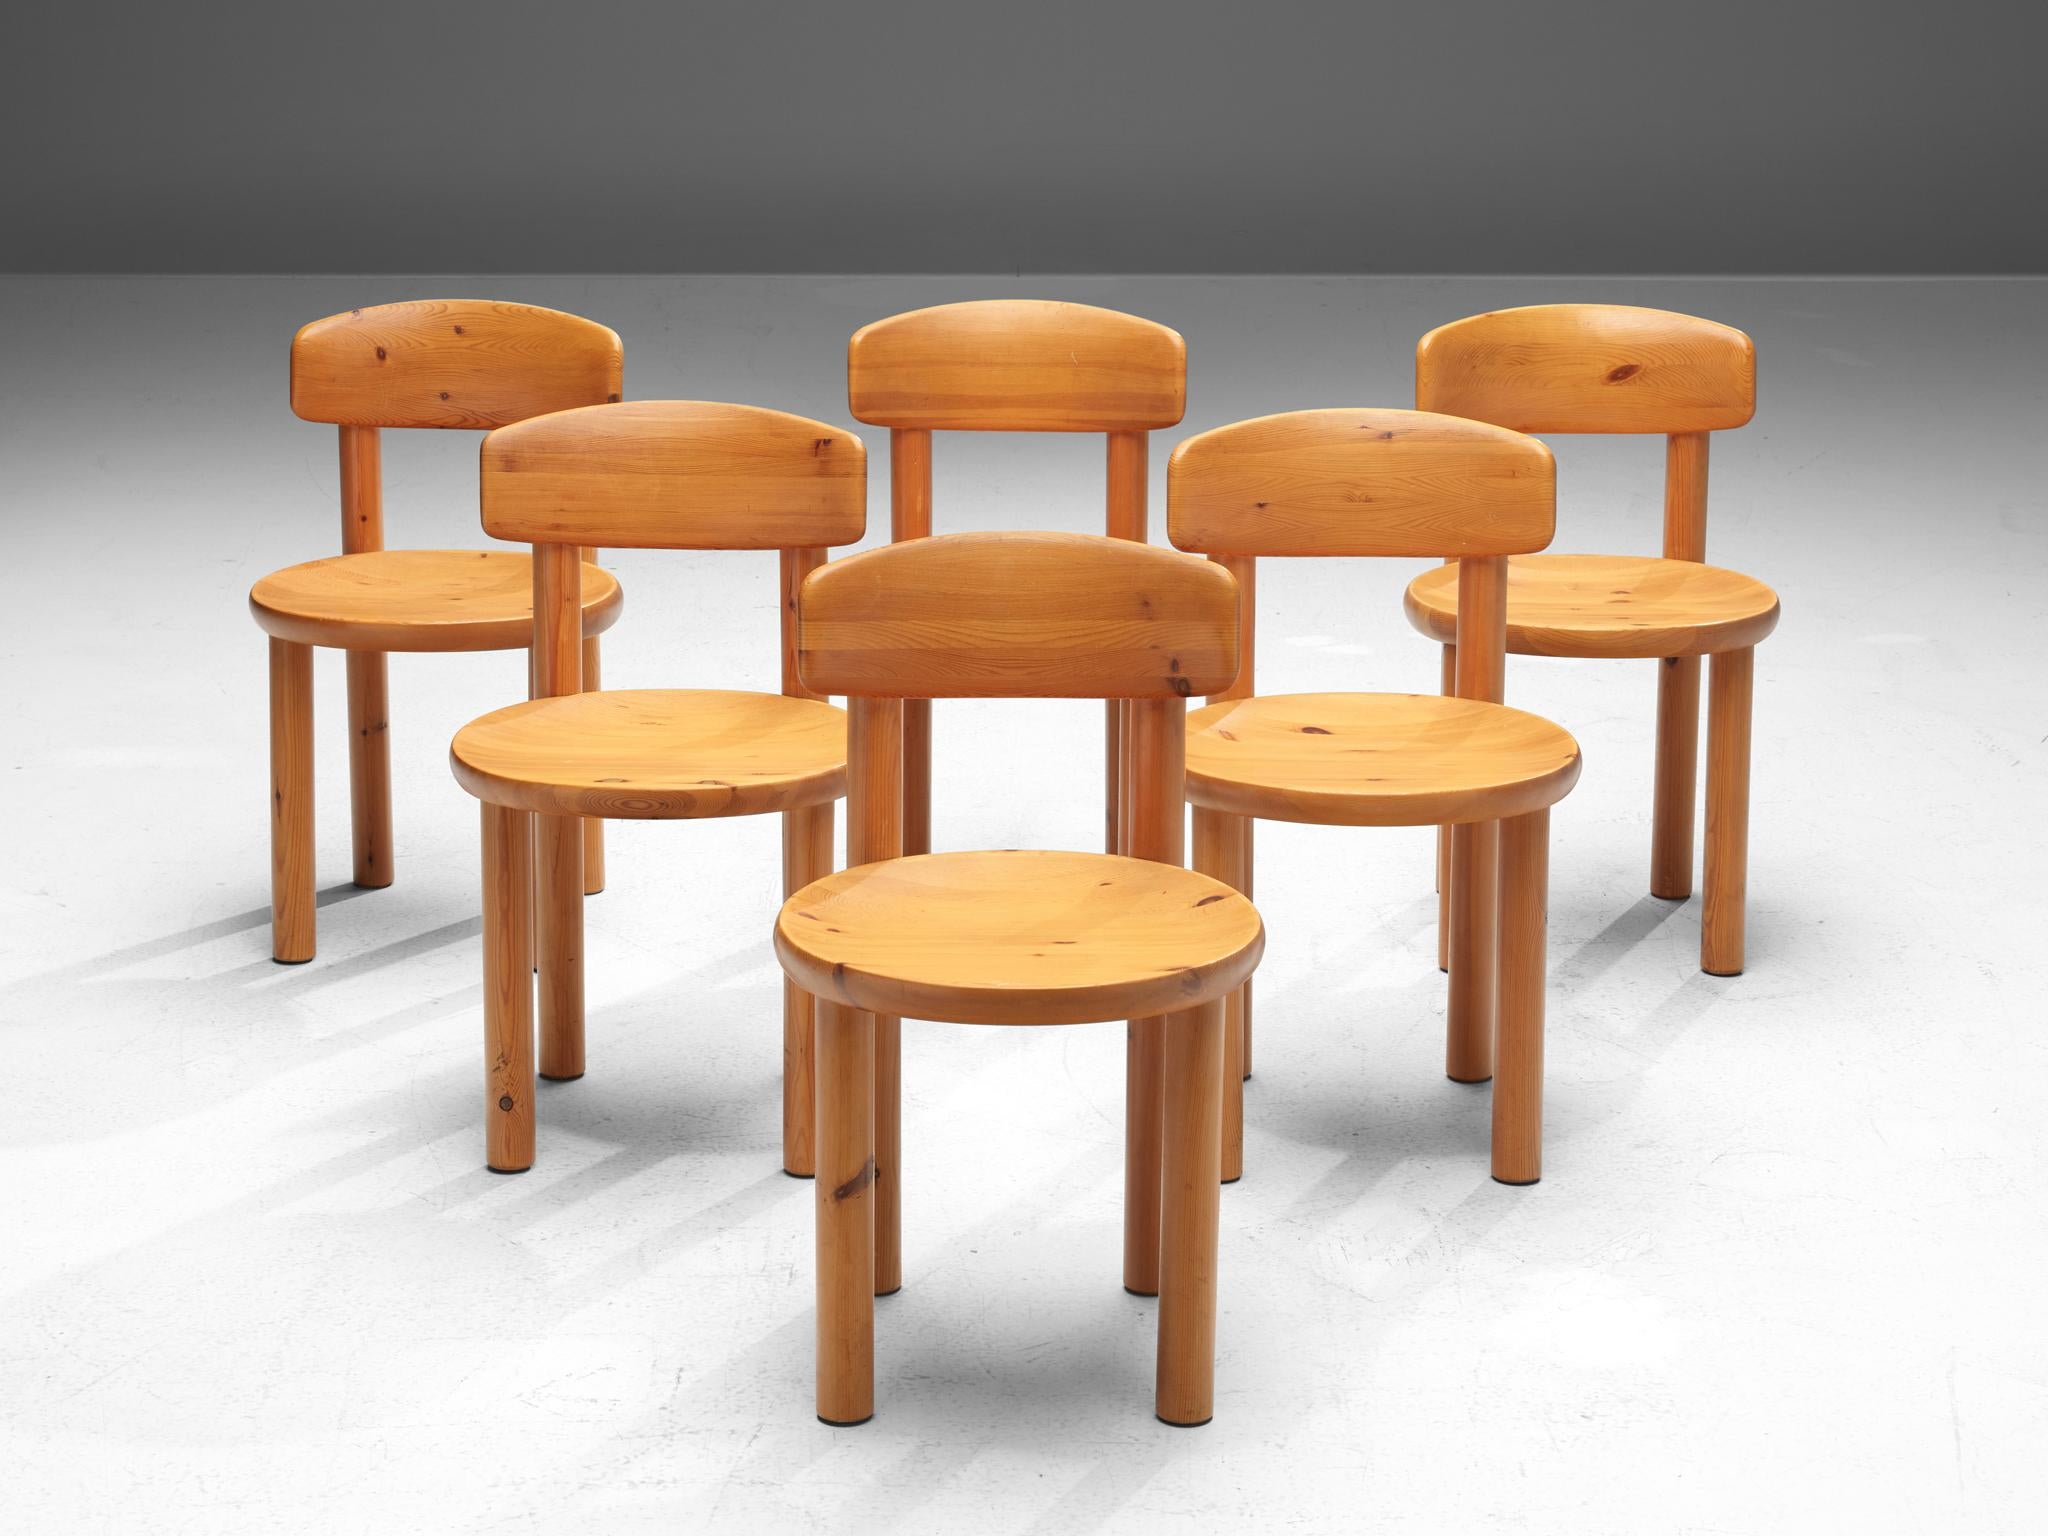 Rainer Daumiller for Hirtshals Savvaerk, set of six dining chairs, pine, Denmark, 1970s

Beautiful set of organic and natural armchairs in solid pine. A simplistic design with a round seating and attention for the natural expression and grain of the